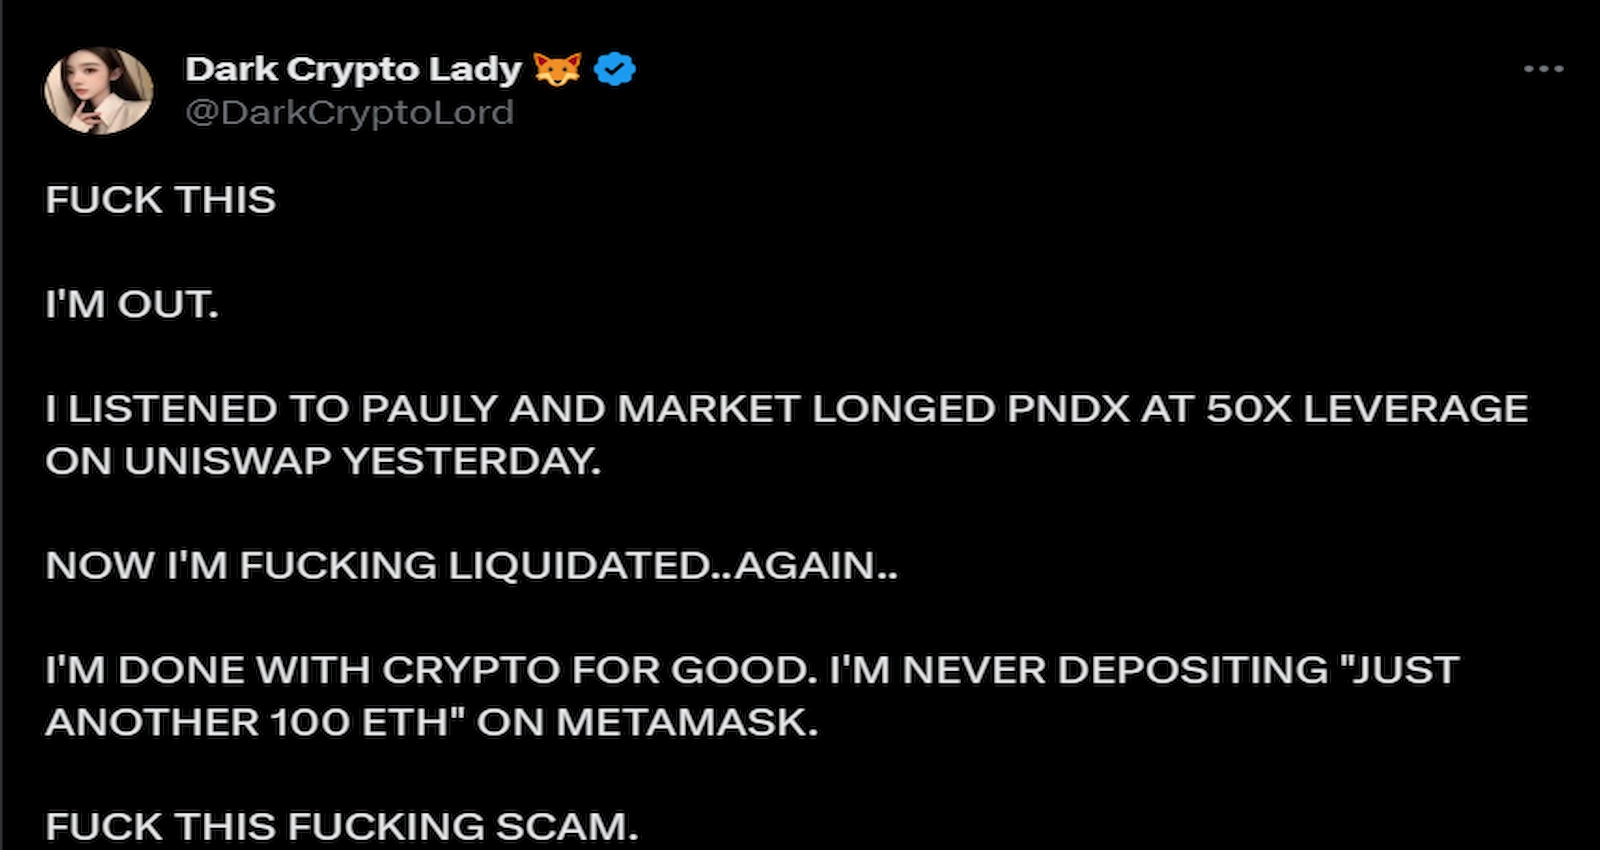 Several users reported losing massive amount of funds due to investing in PNDX.